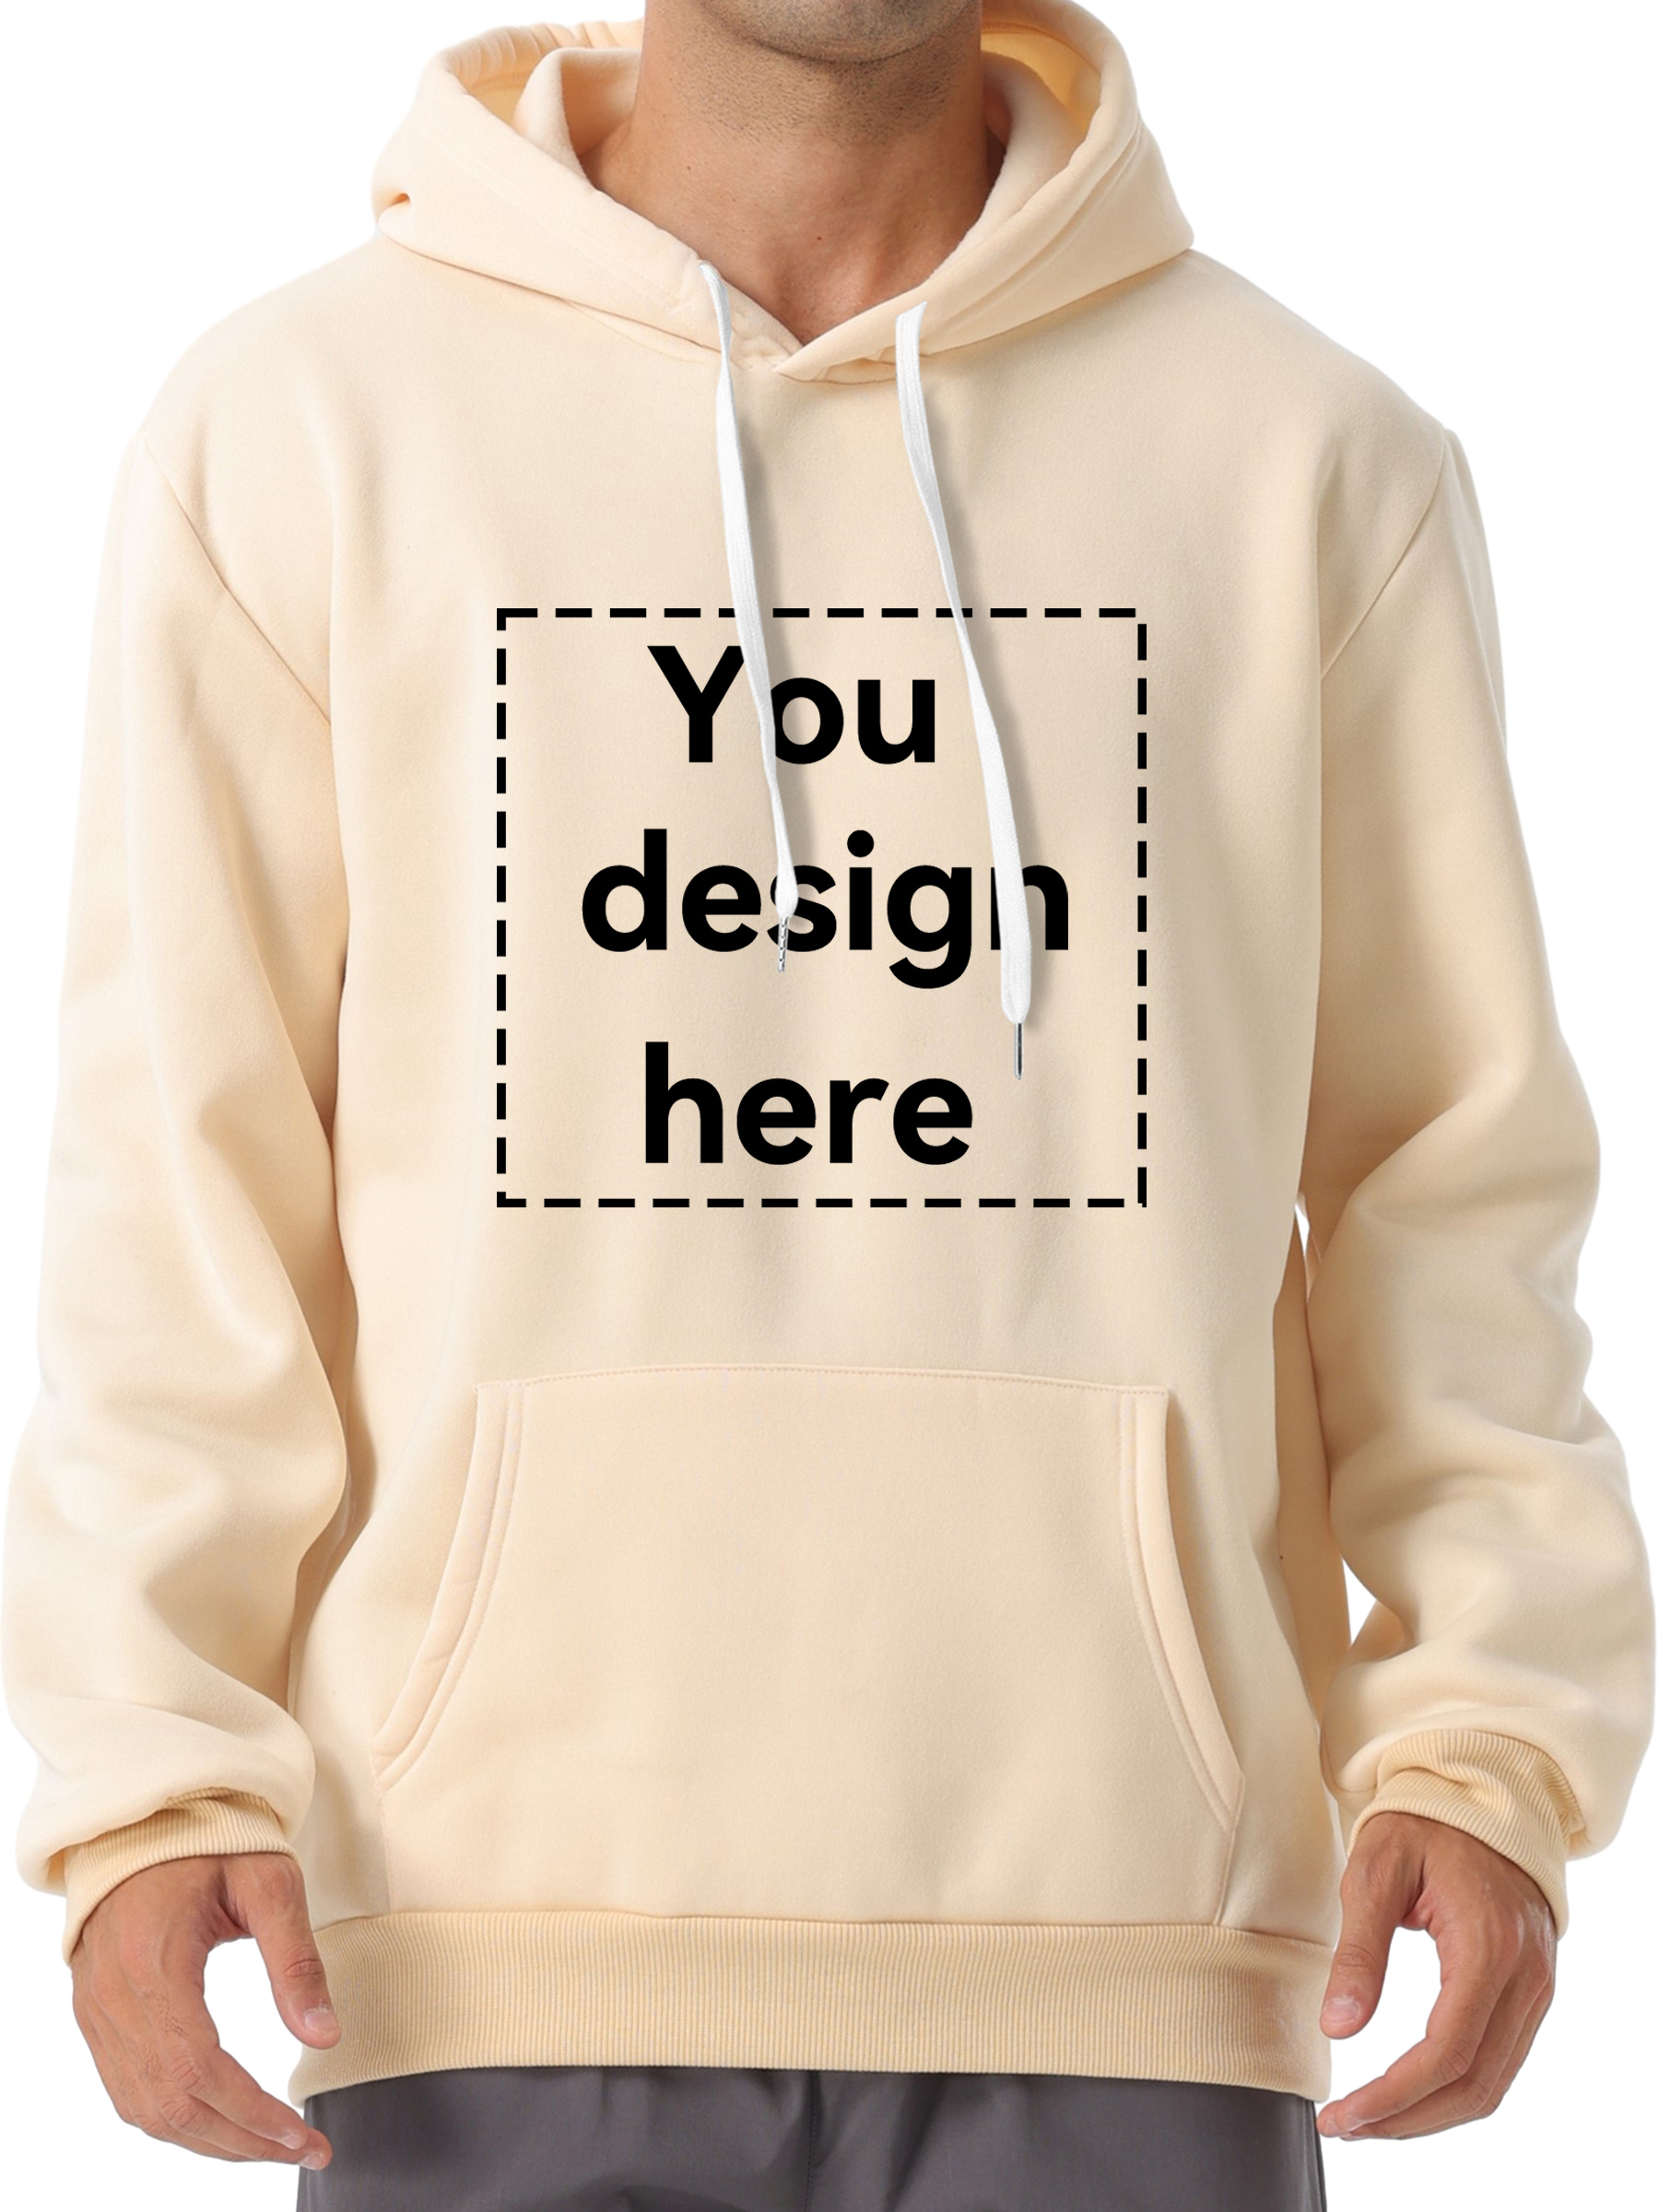 you design here letter print customized kangaroo pocket hoodie casual long sleeve hoodies pullover sweatshirt mens clothing for fall winter details 0